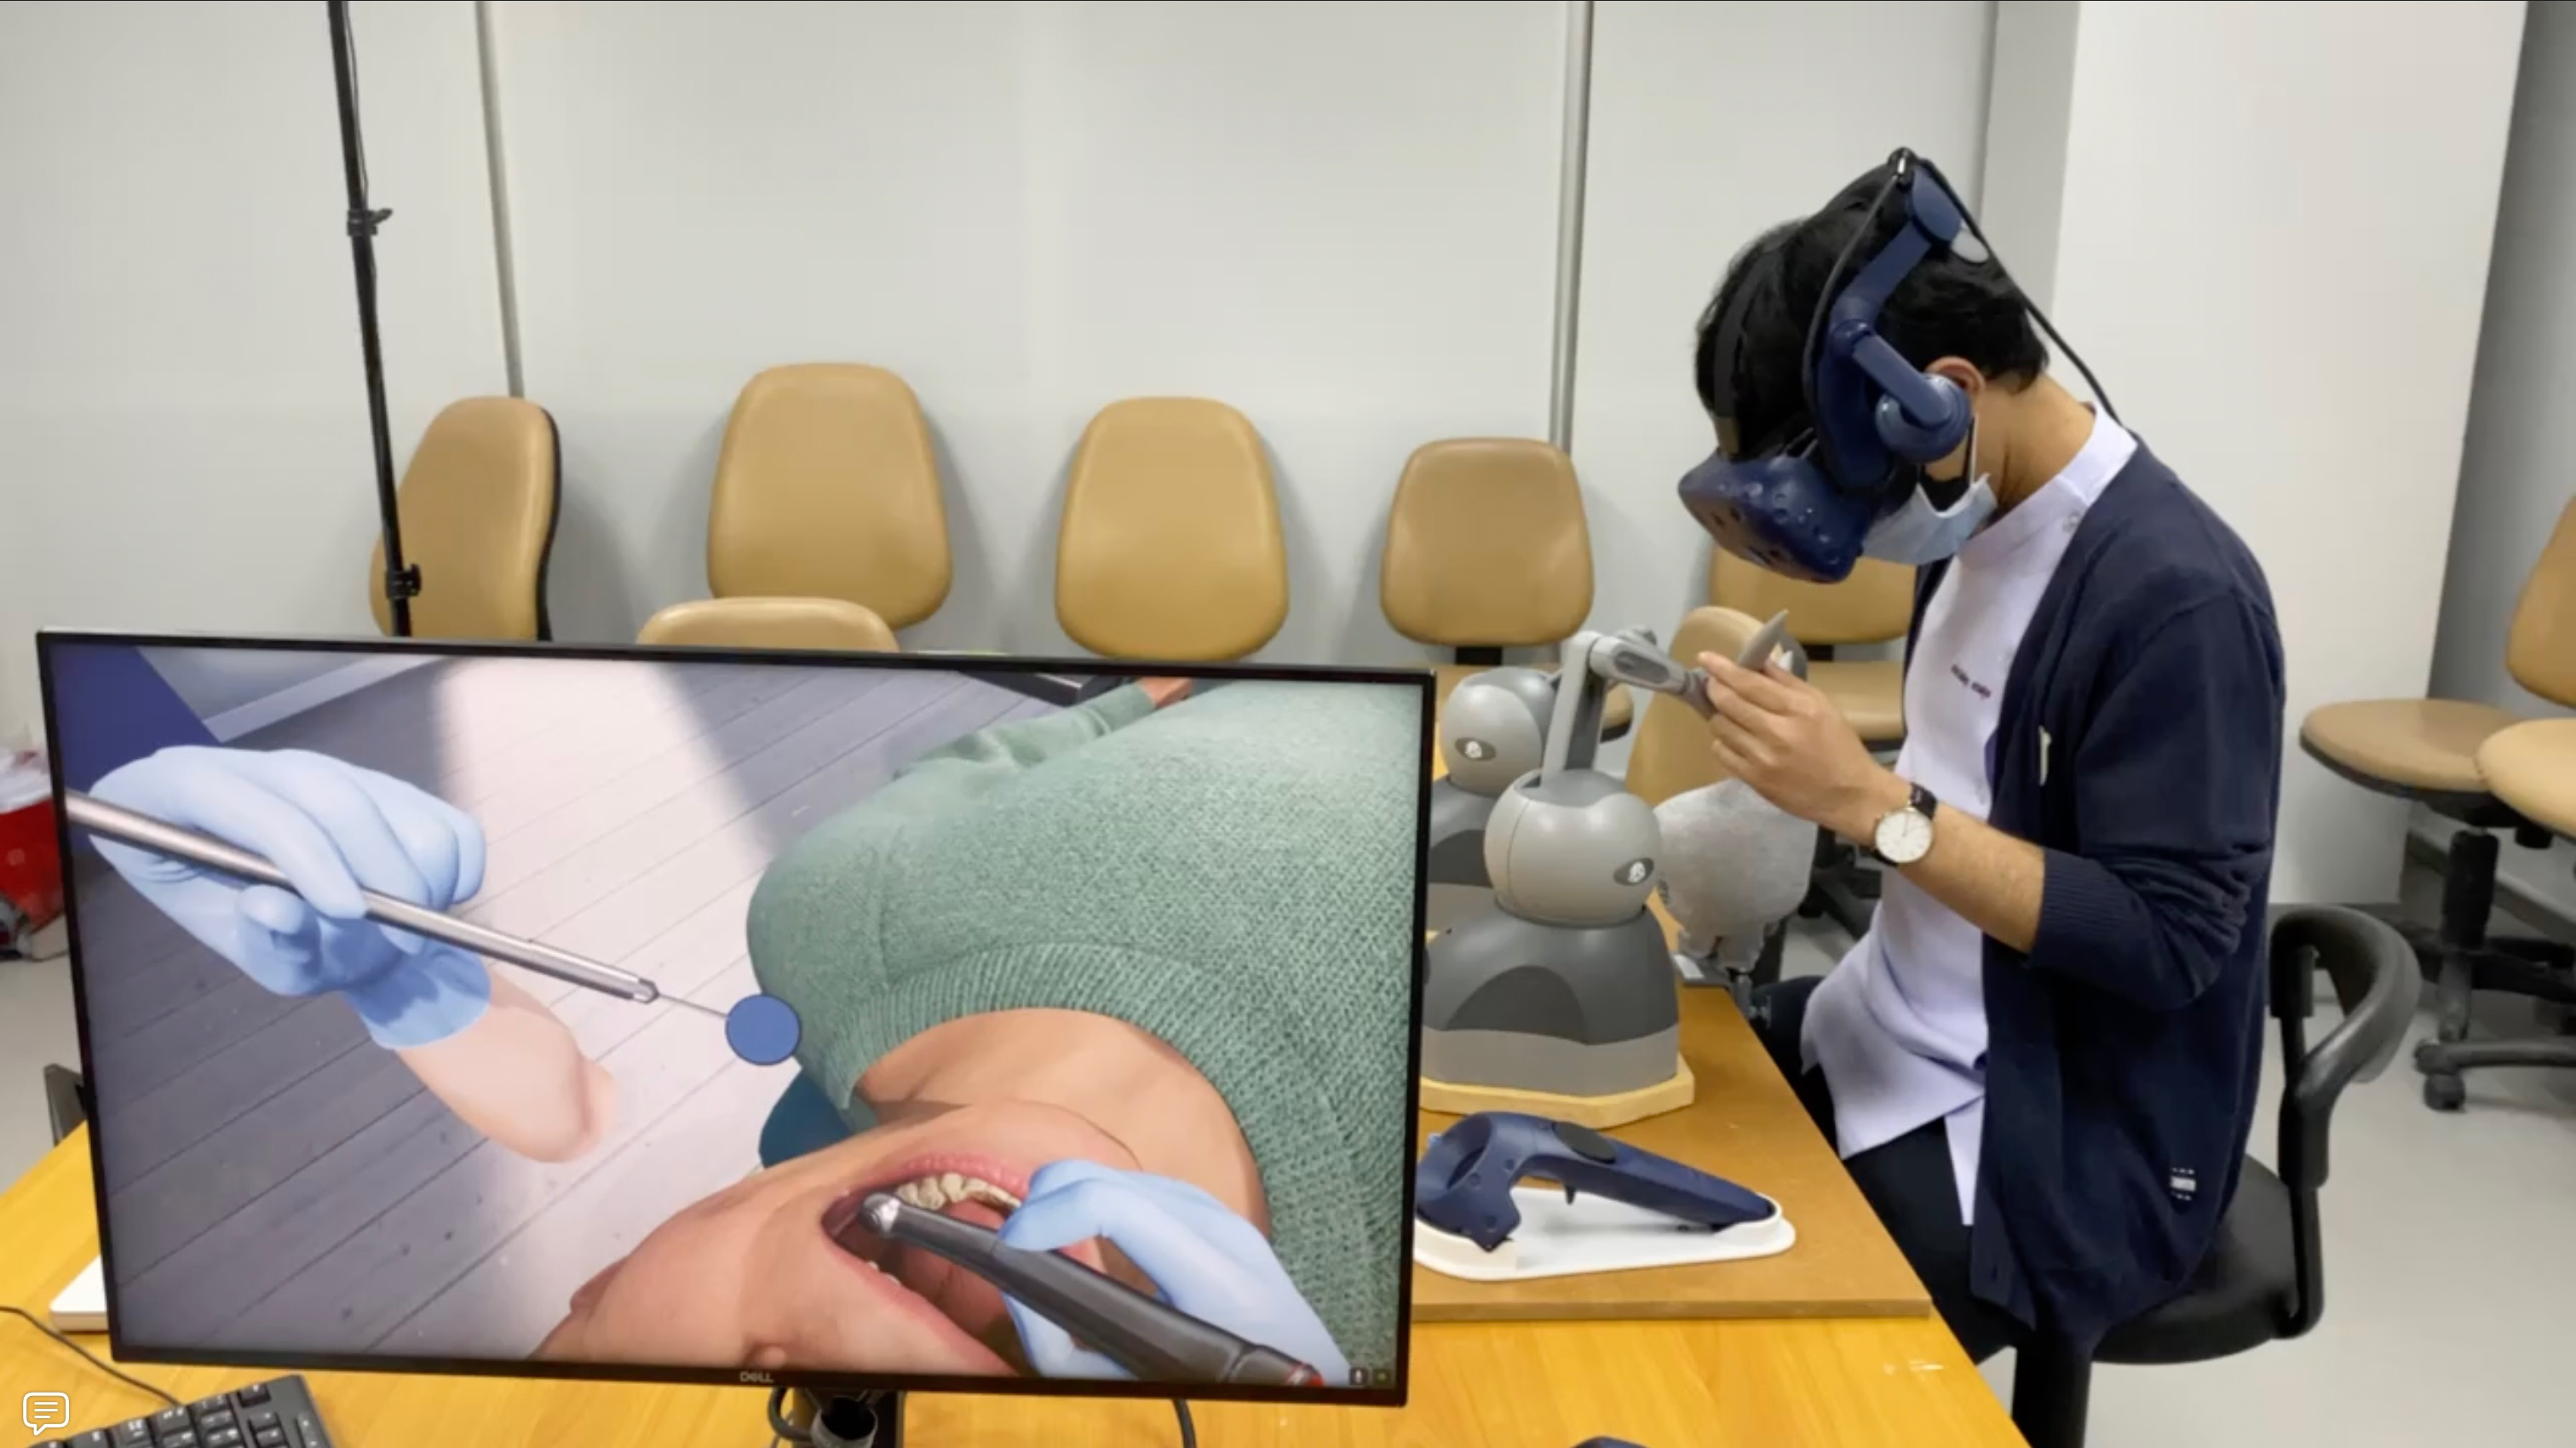 The Impact of 3D Stereopsis and Hand-Tool Alignment on Effectiveness of a VR-based Simulator for Dental Training